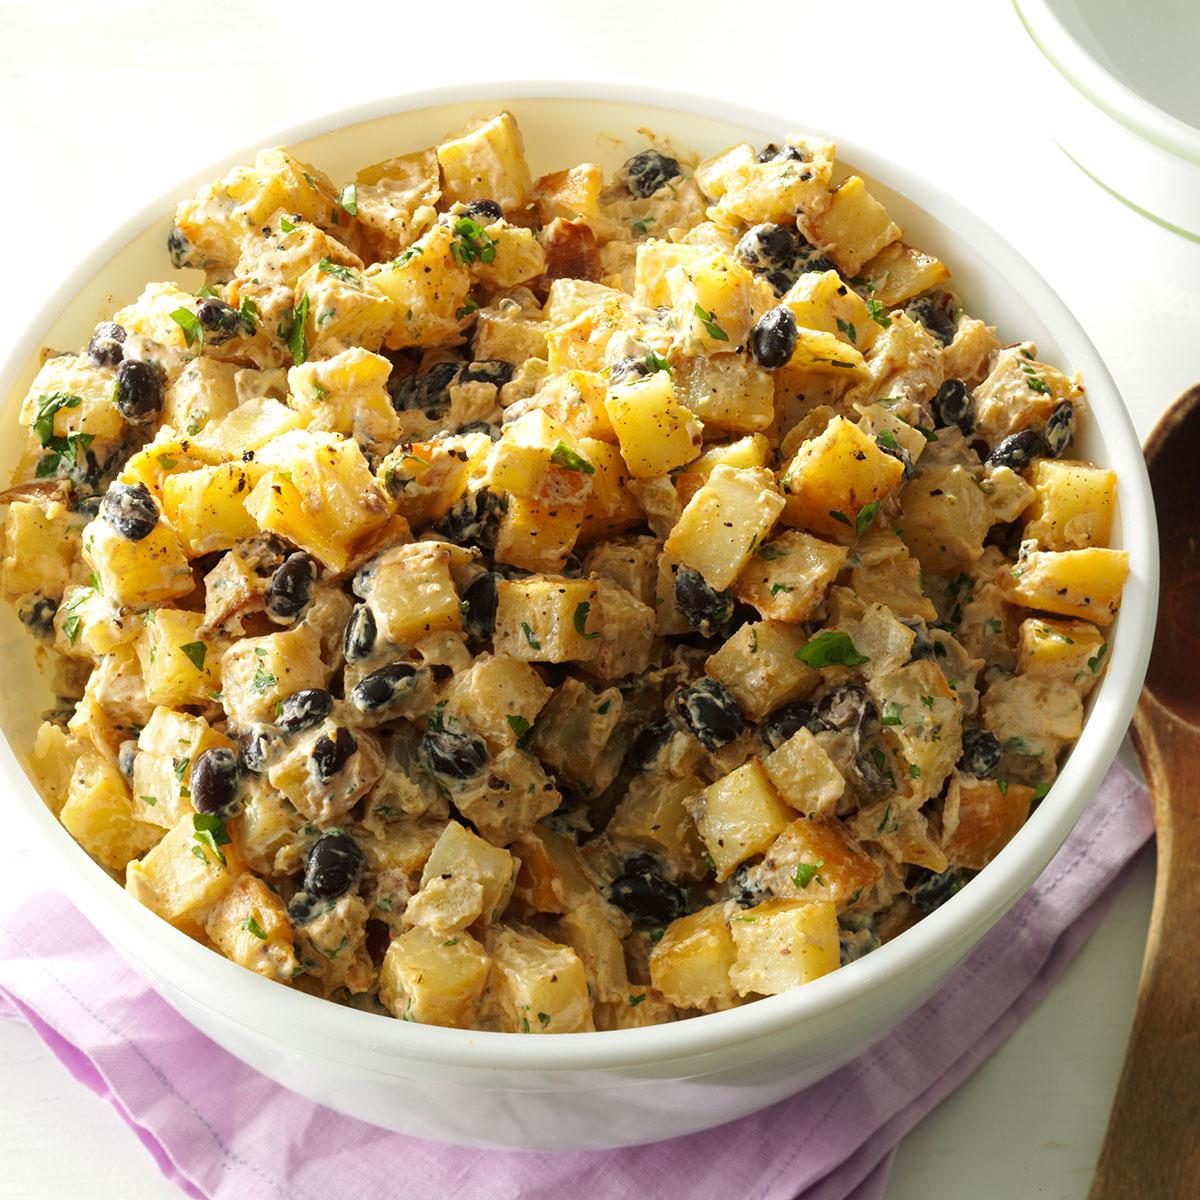 https://www.tasteofhome.com/wp-content/uploads/2018/01/Mexican-Roasted-Potato-Salad_exps171559_SD143203D10_17_1bC_RMS-1.jpg